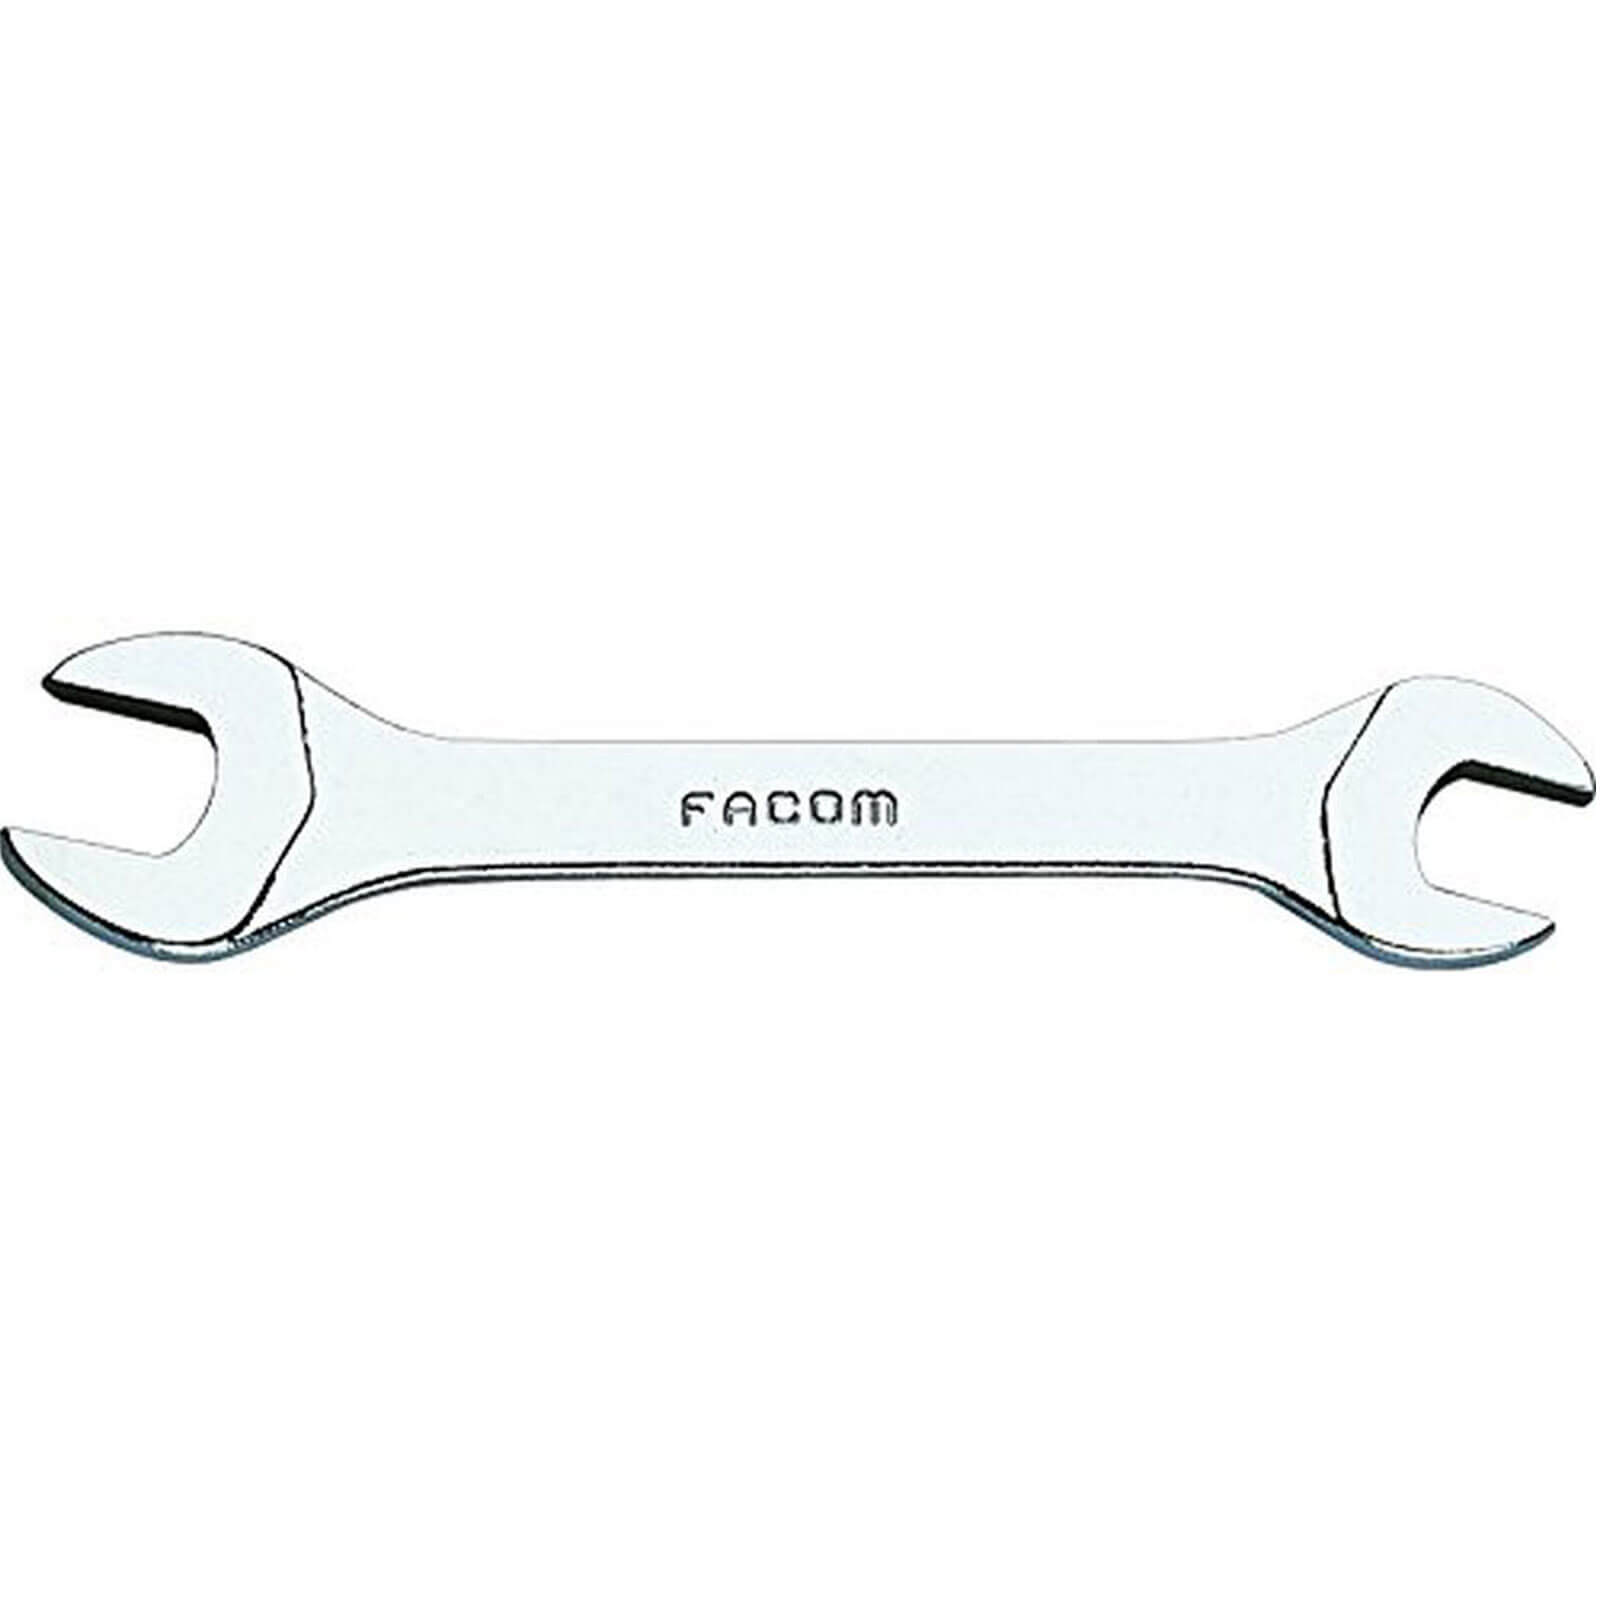 Image of Facom Miniature Open End Spanner Metric 4mm x 5mm